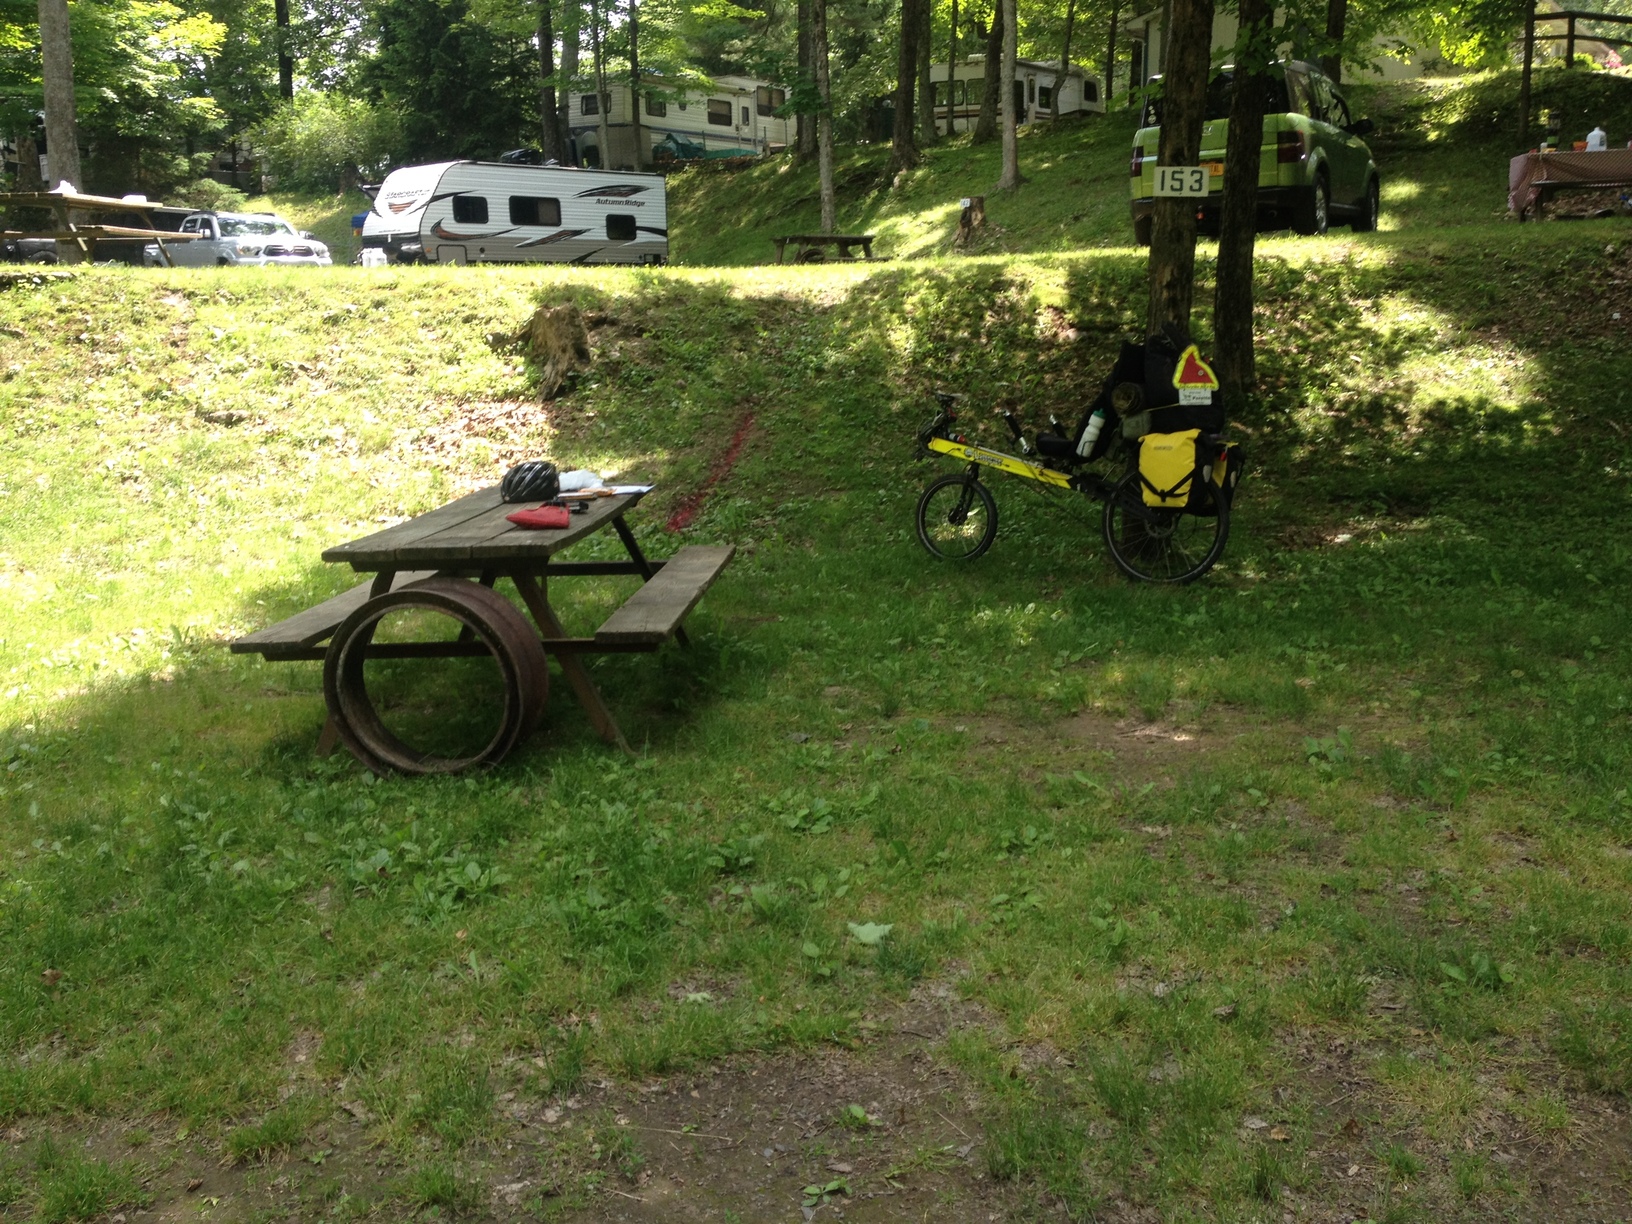 River Beach Campground, Milford, PA